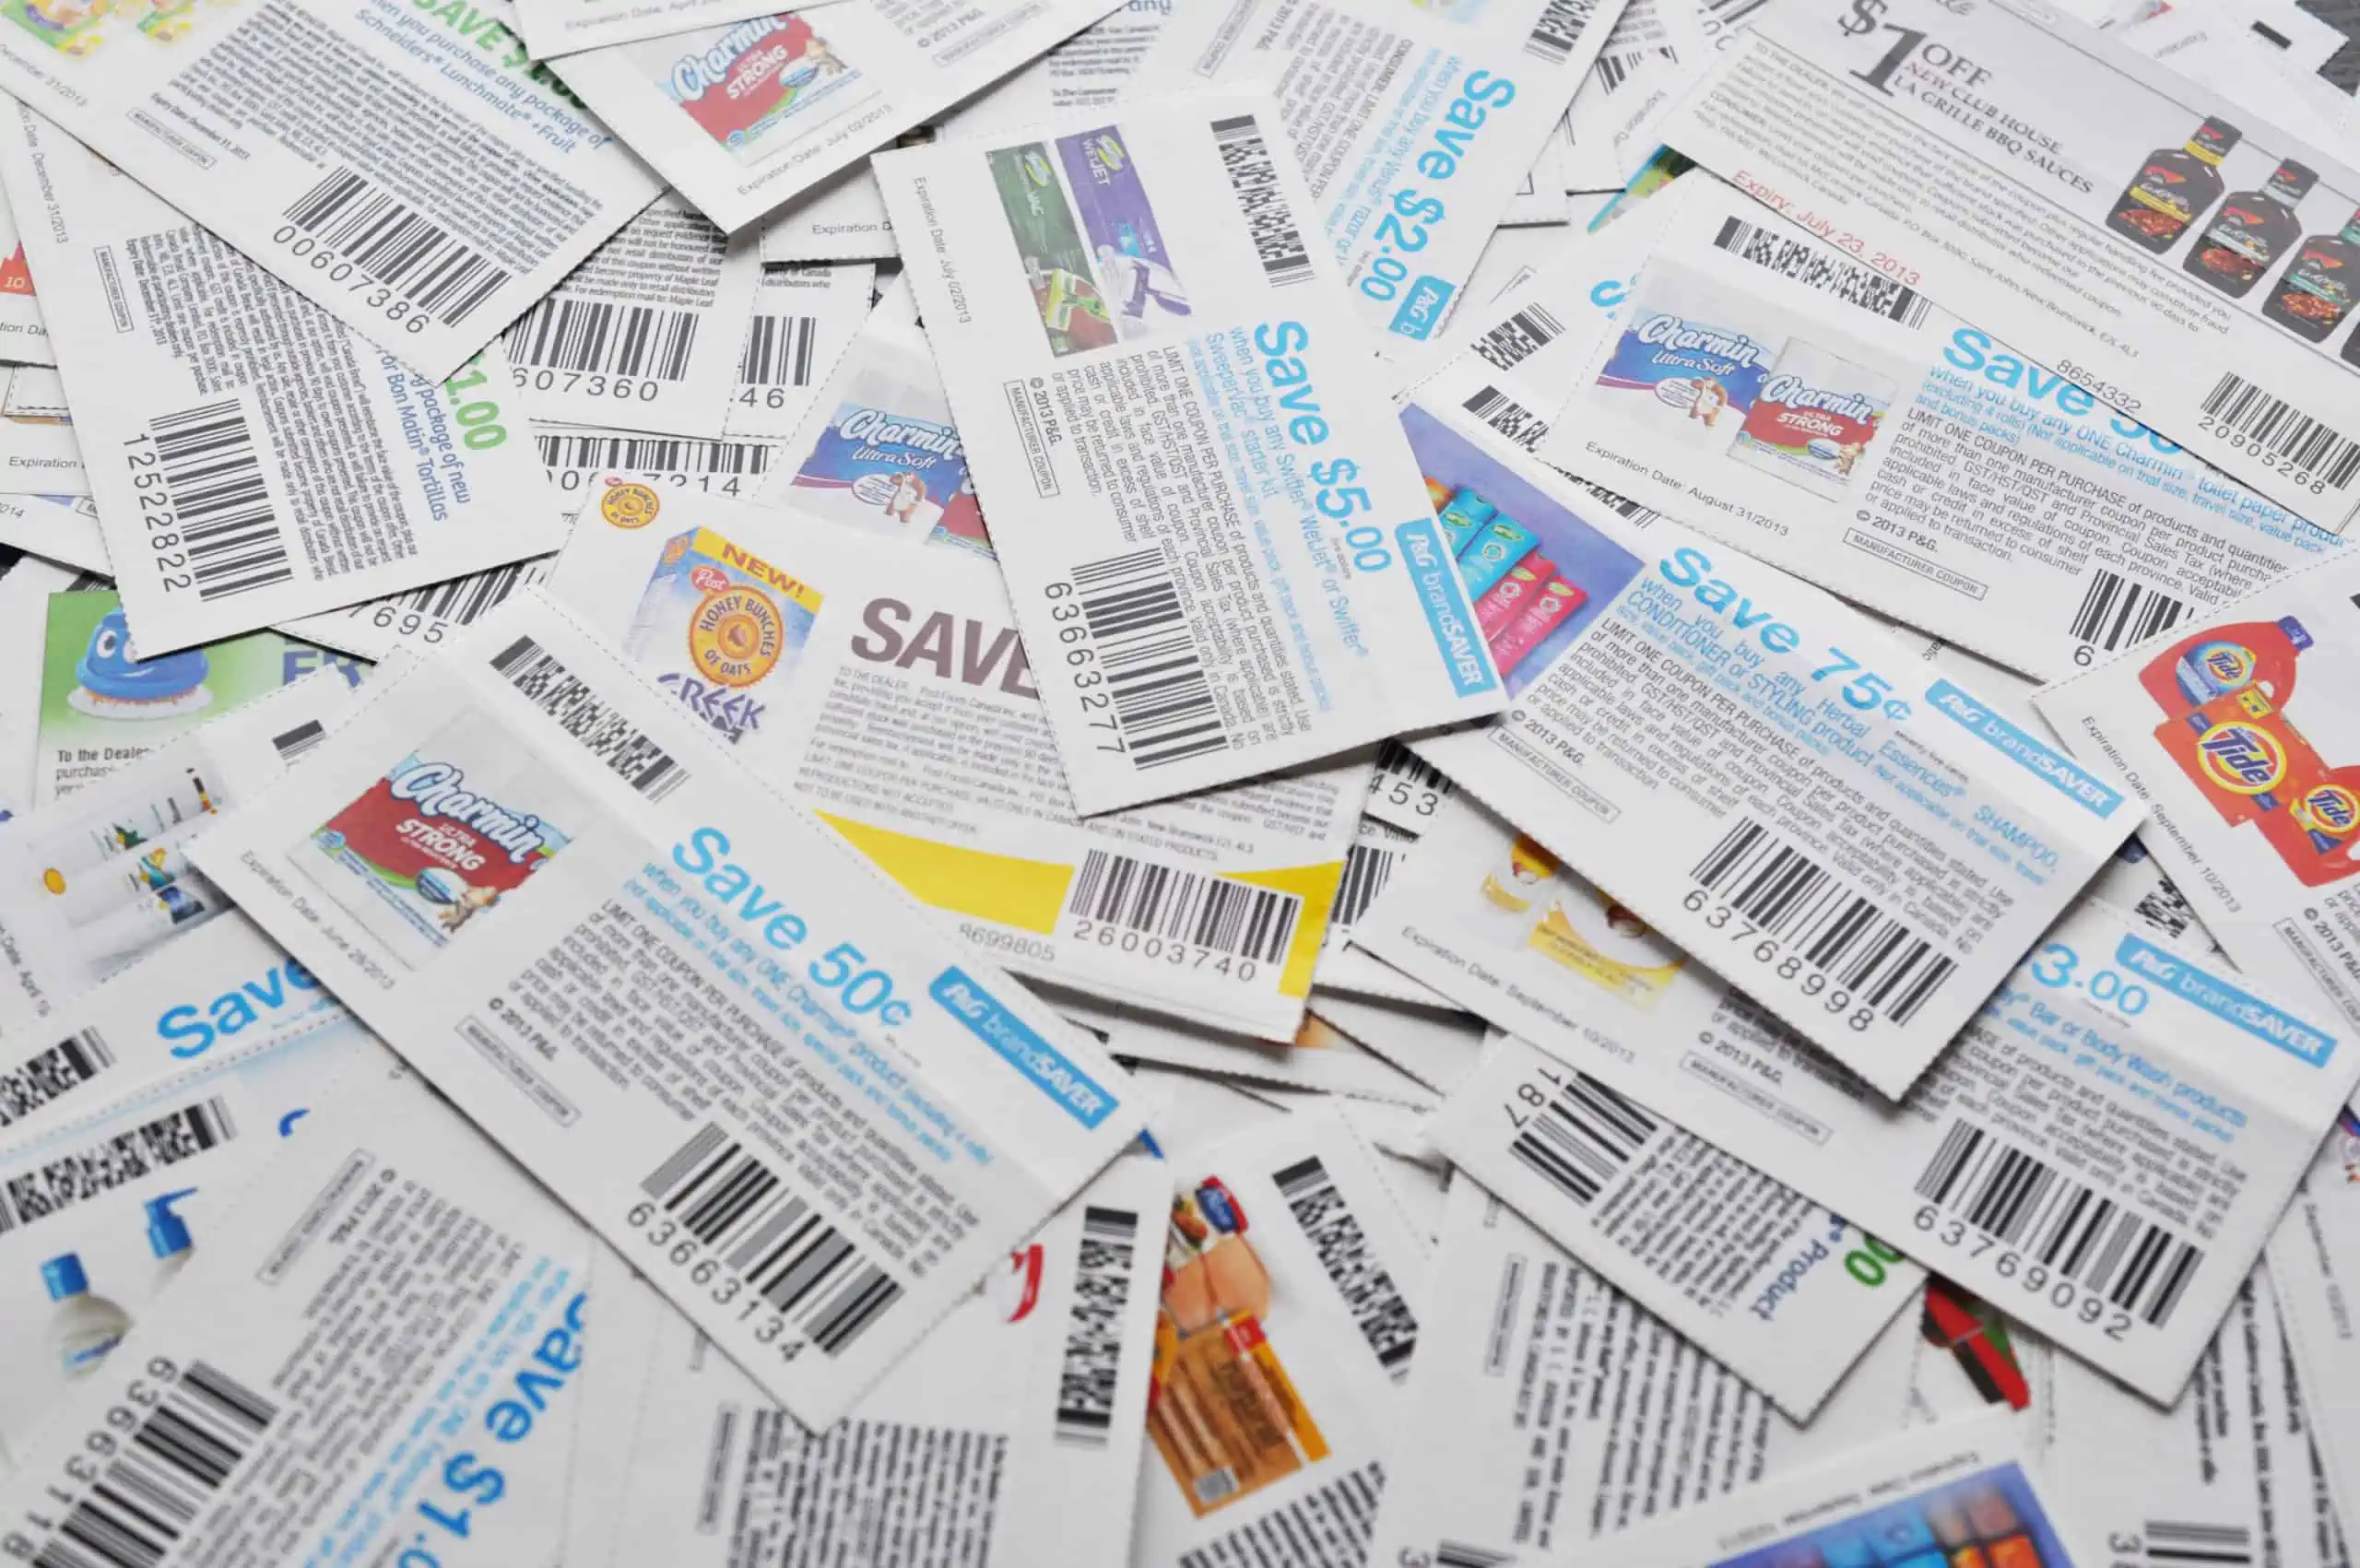 Hundreds of manufacturer coupons piled on top of one another